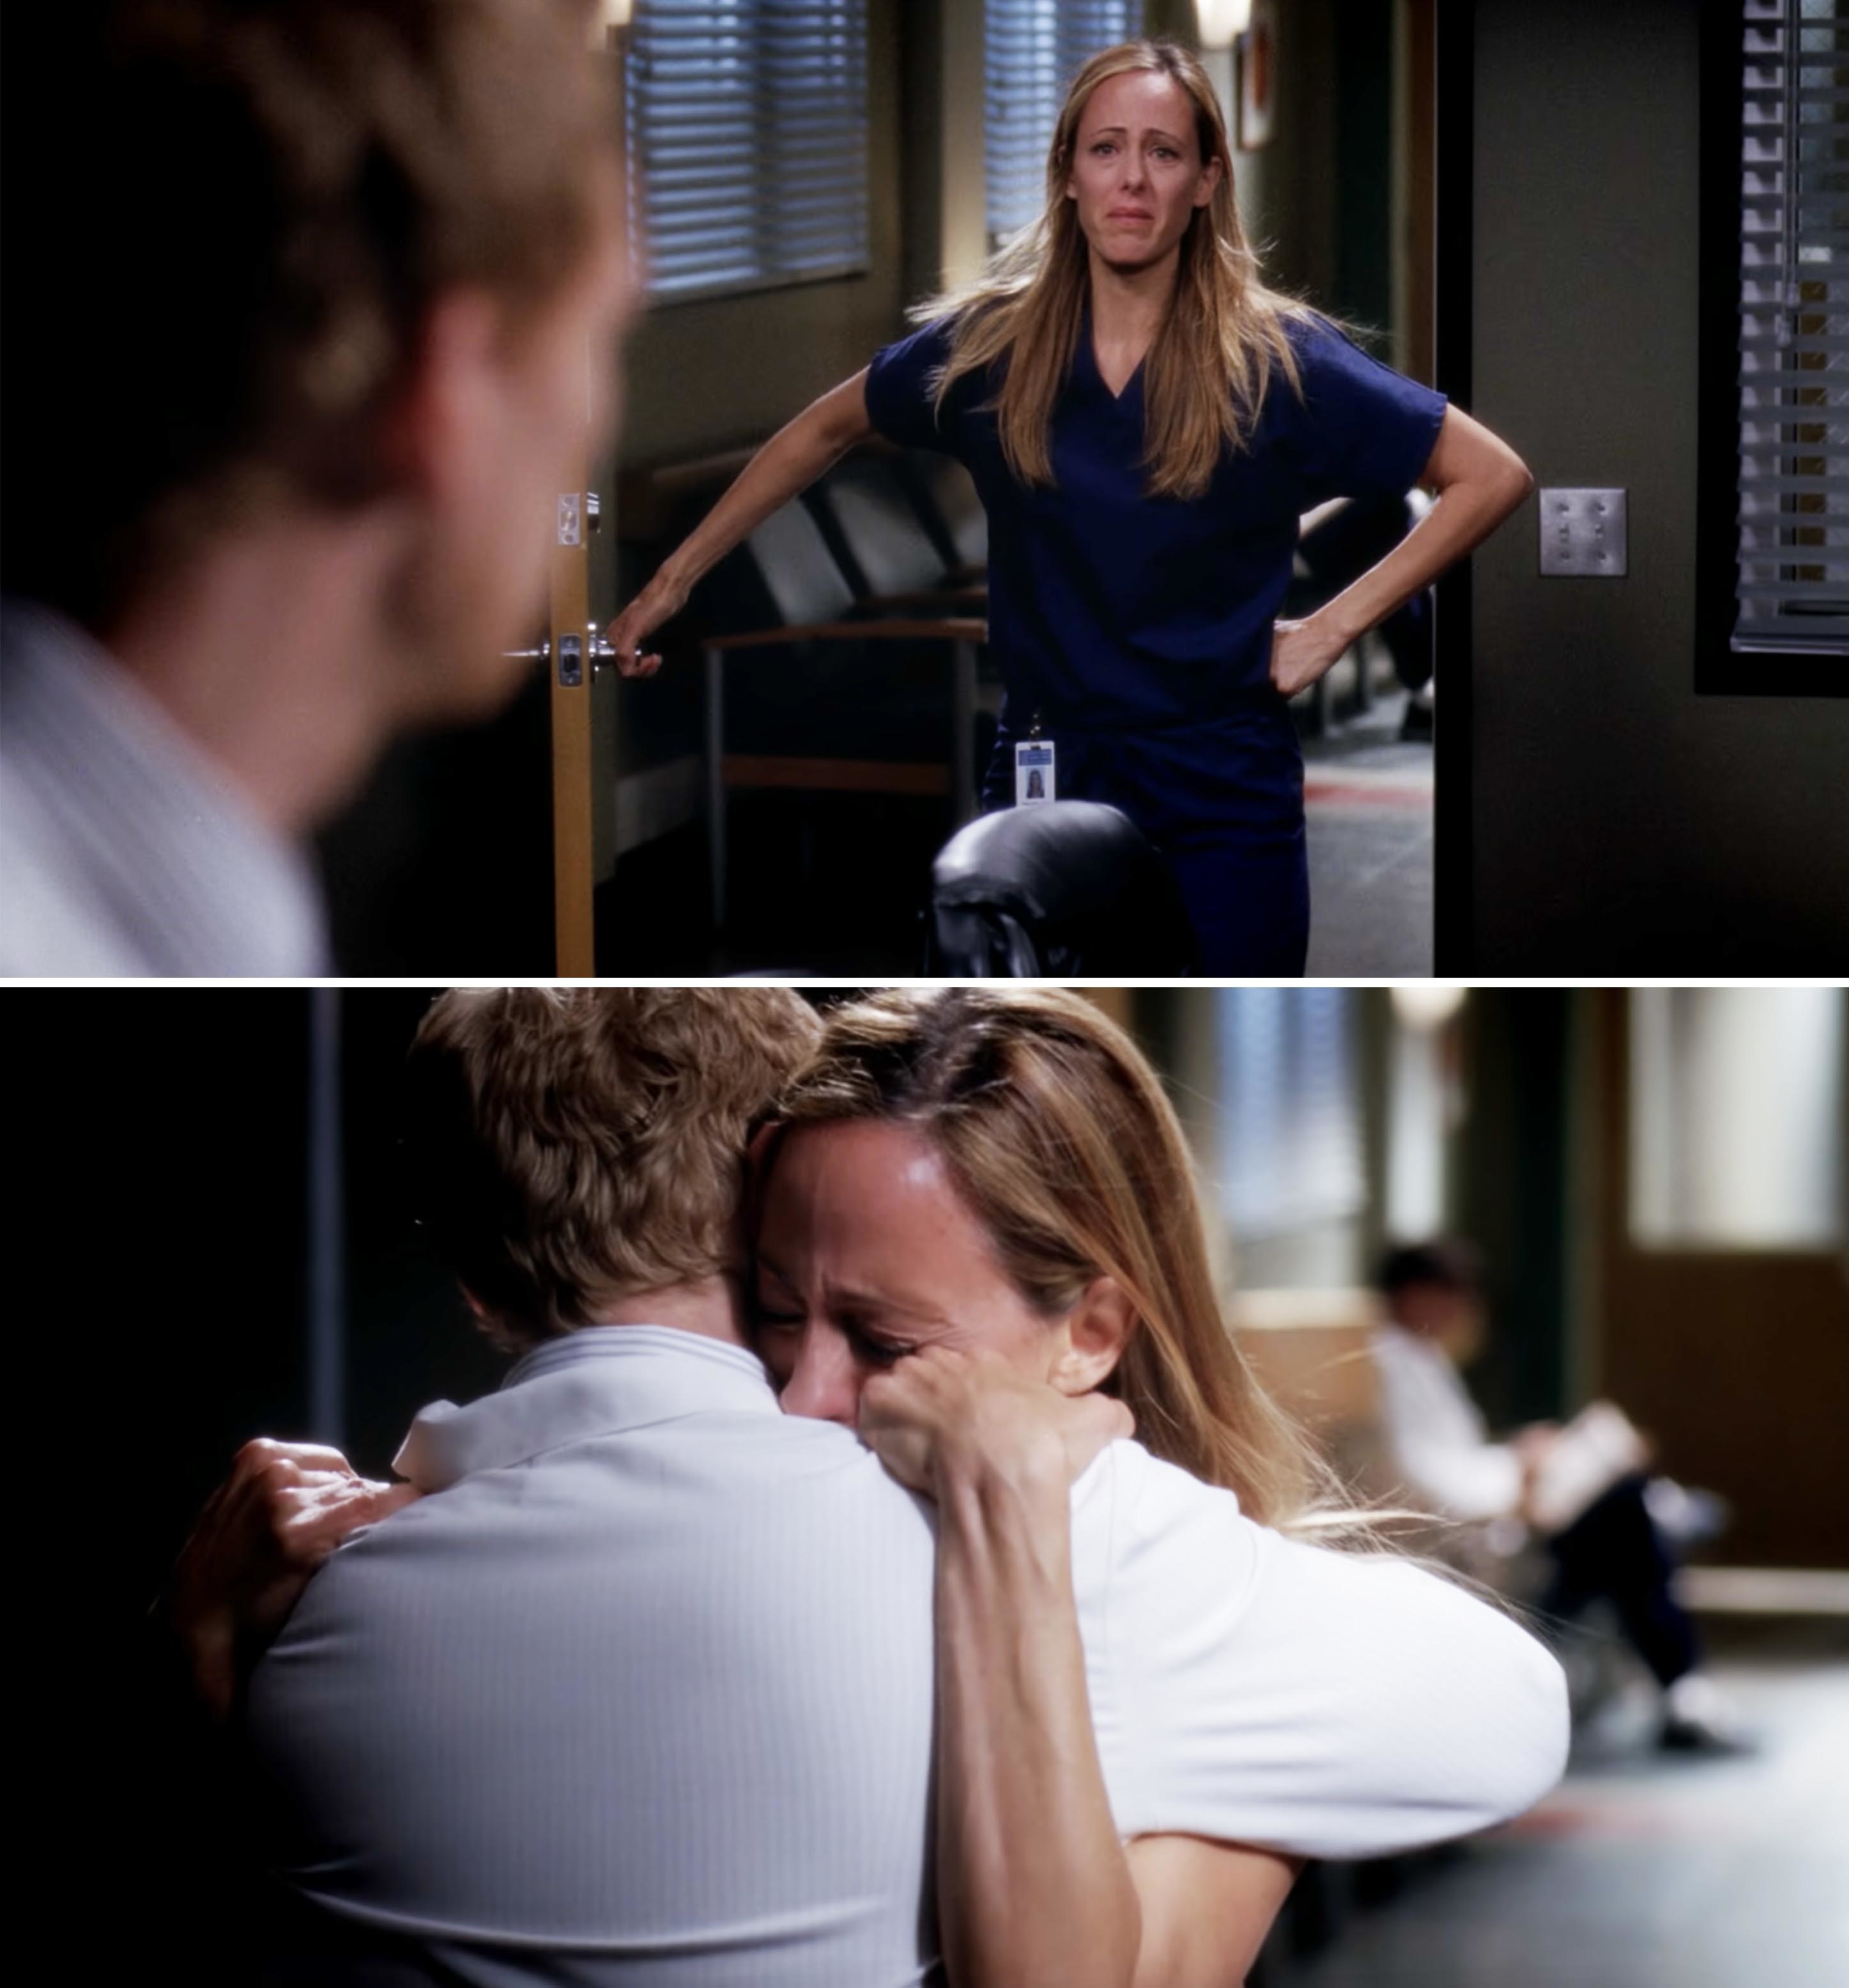 teddy hugging someone as she cries